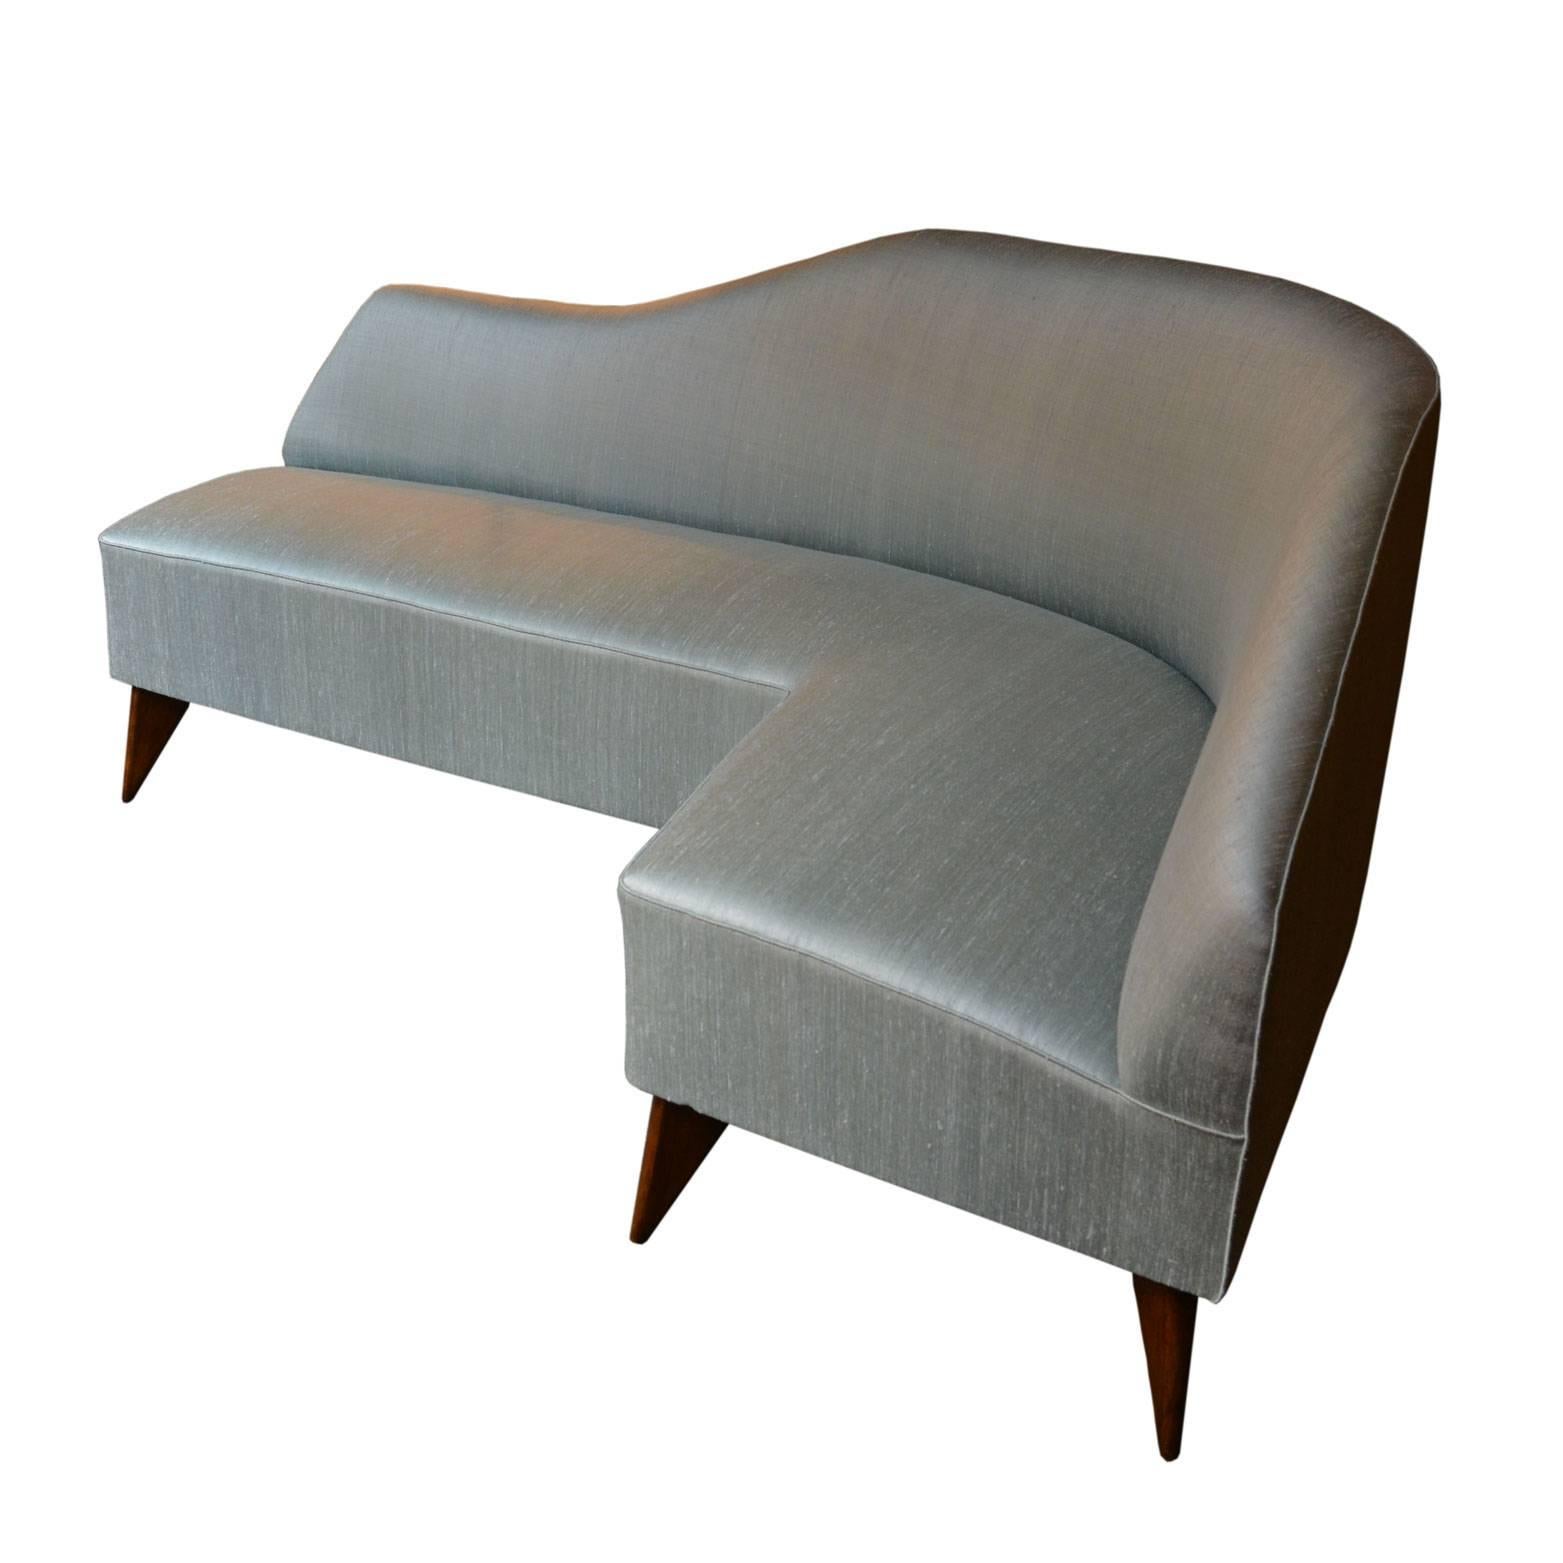 Rare curved sofa by Guglielmo Veronesi. The original vintage structure has been reupholstered with a dust color silk shantung.